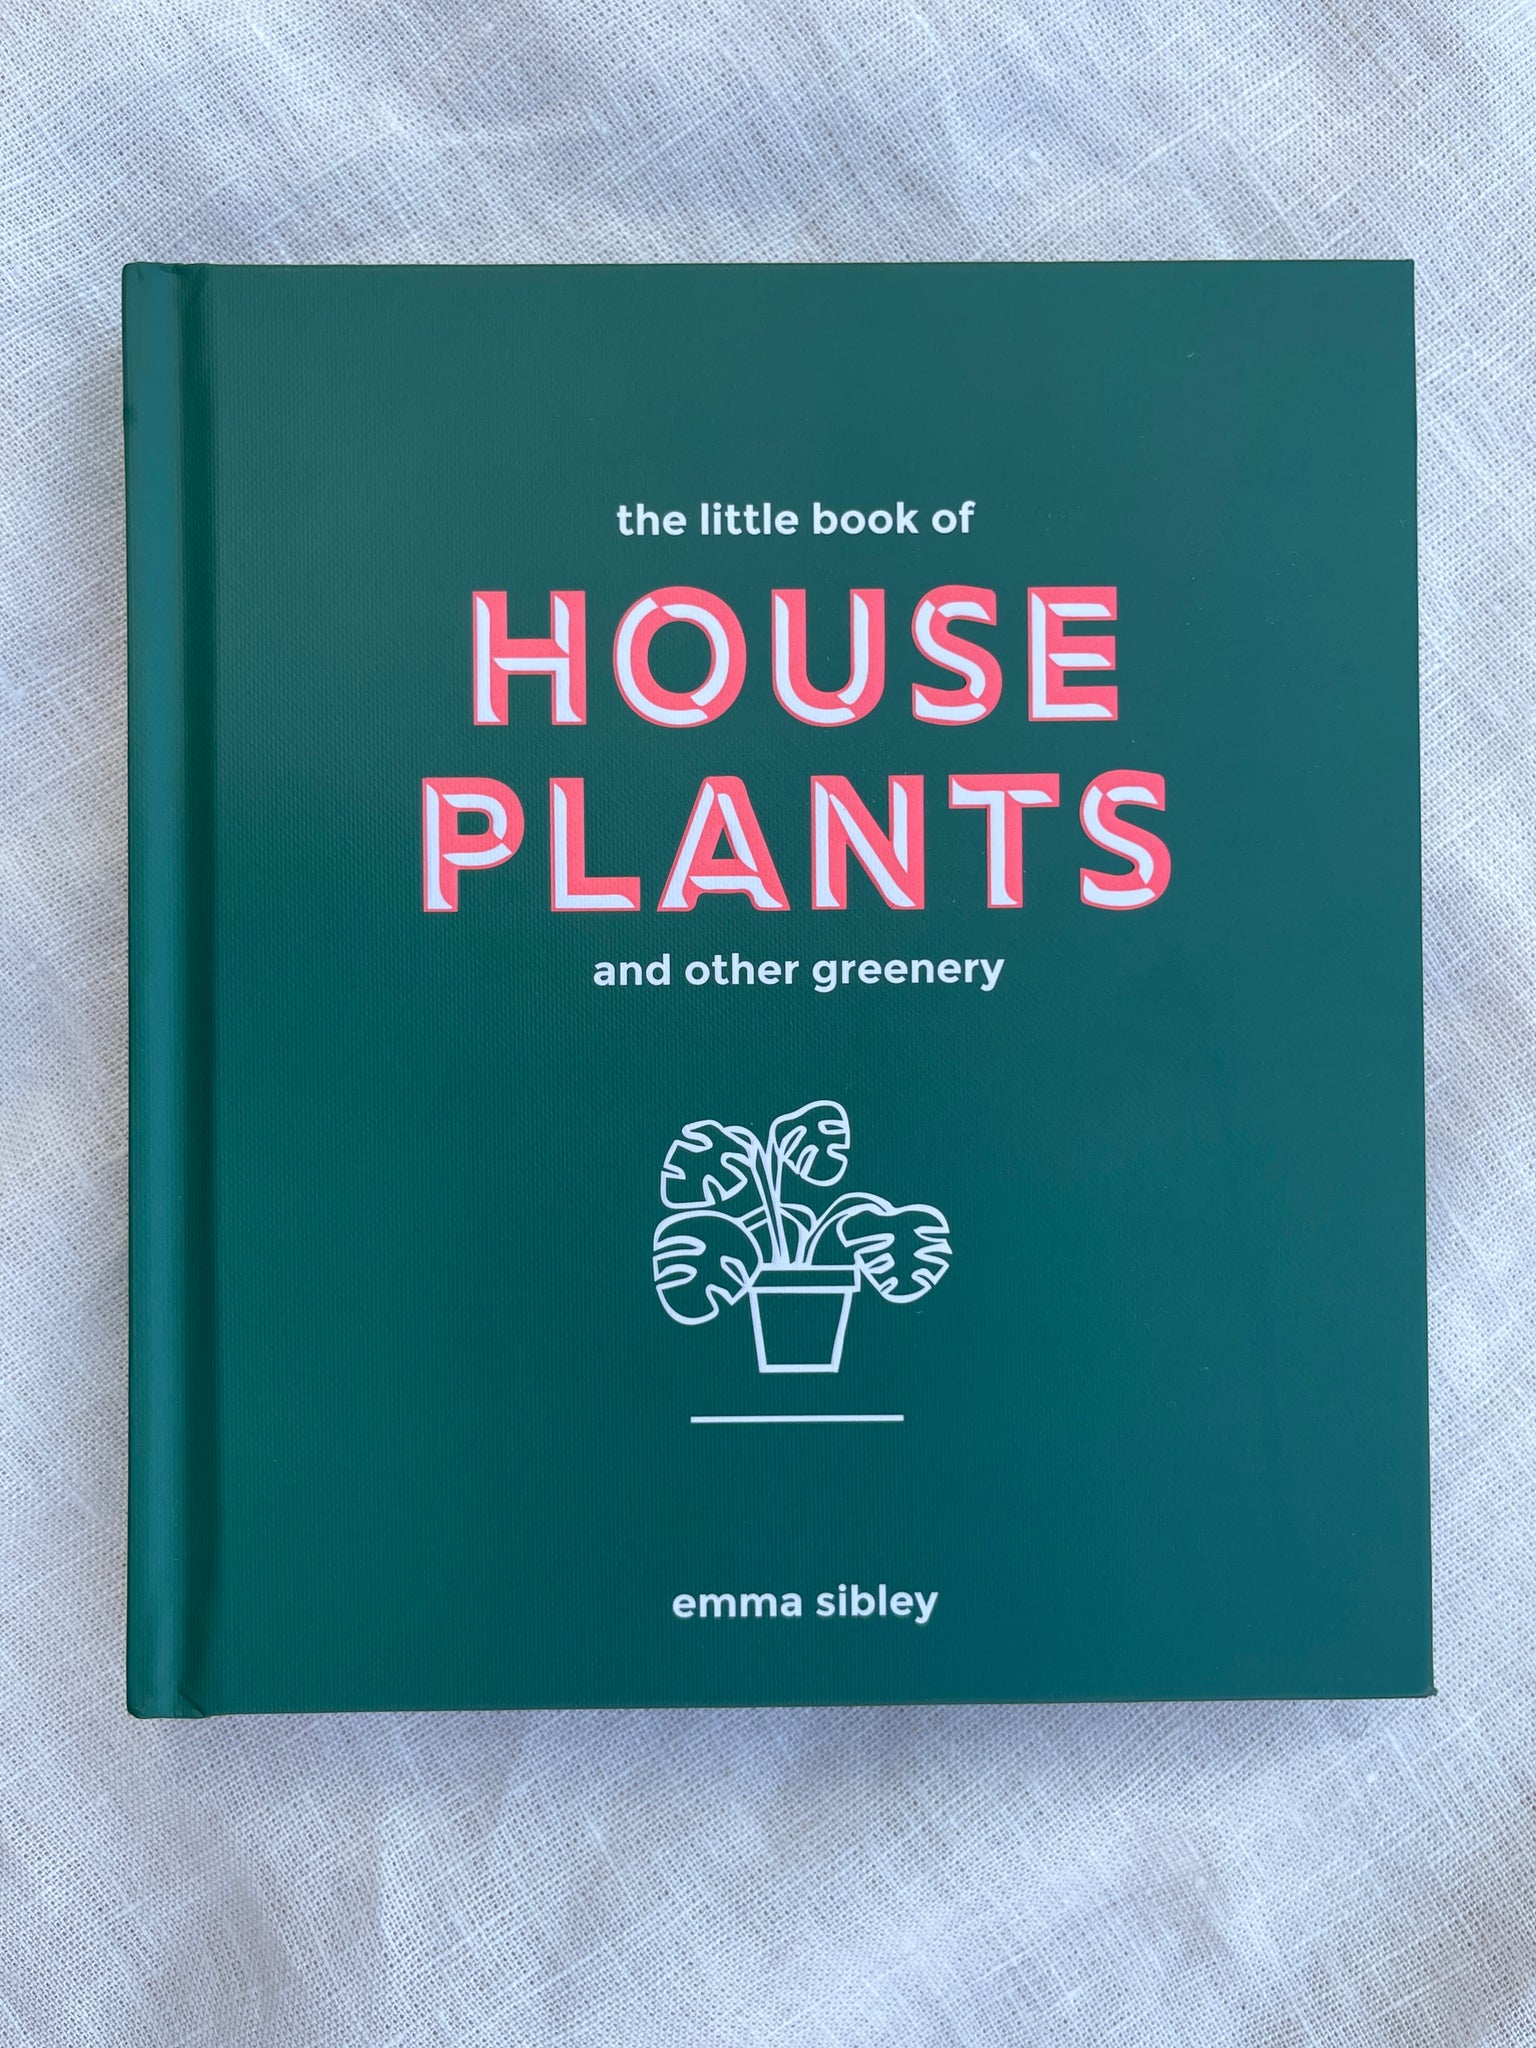 The Little Book of House Plants and Other Greenery book by emma sibley